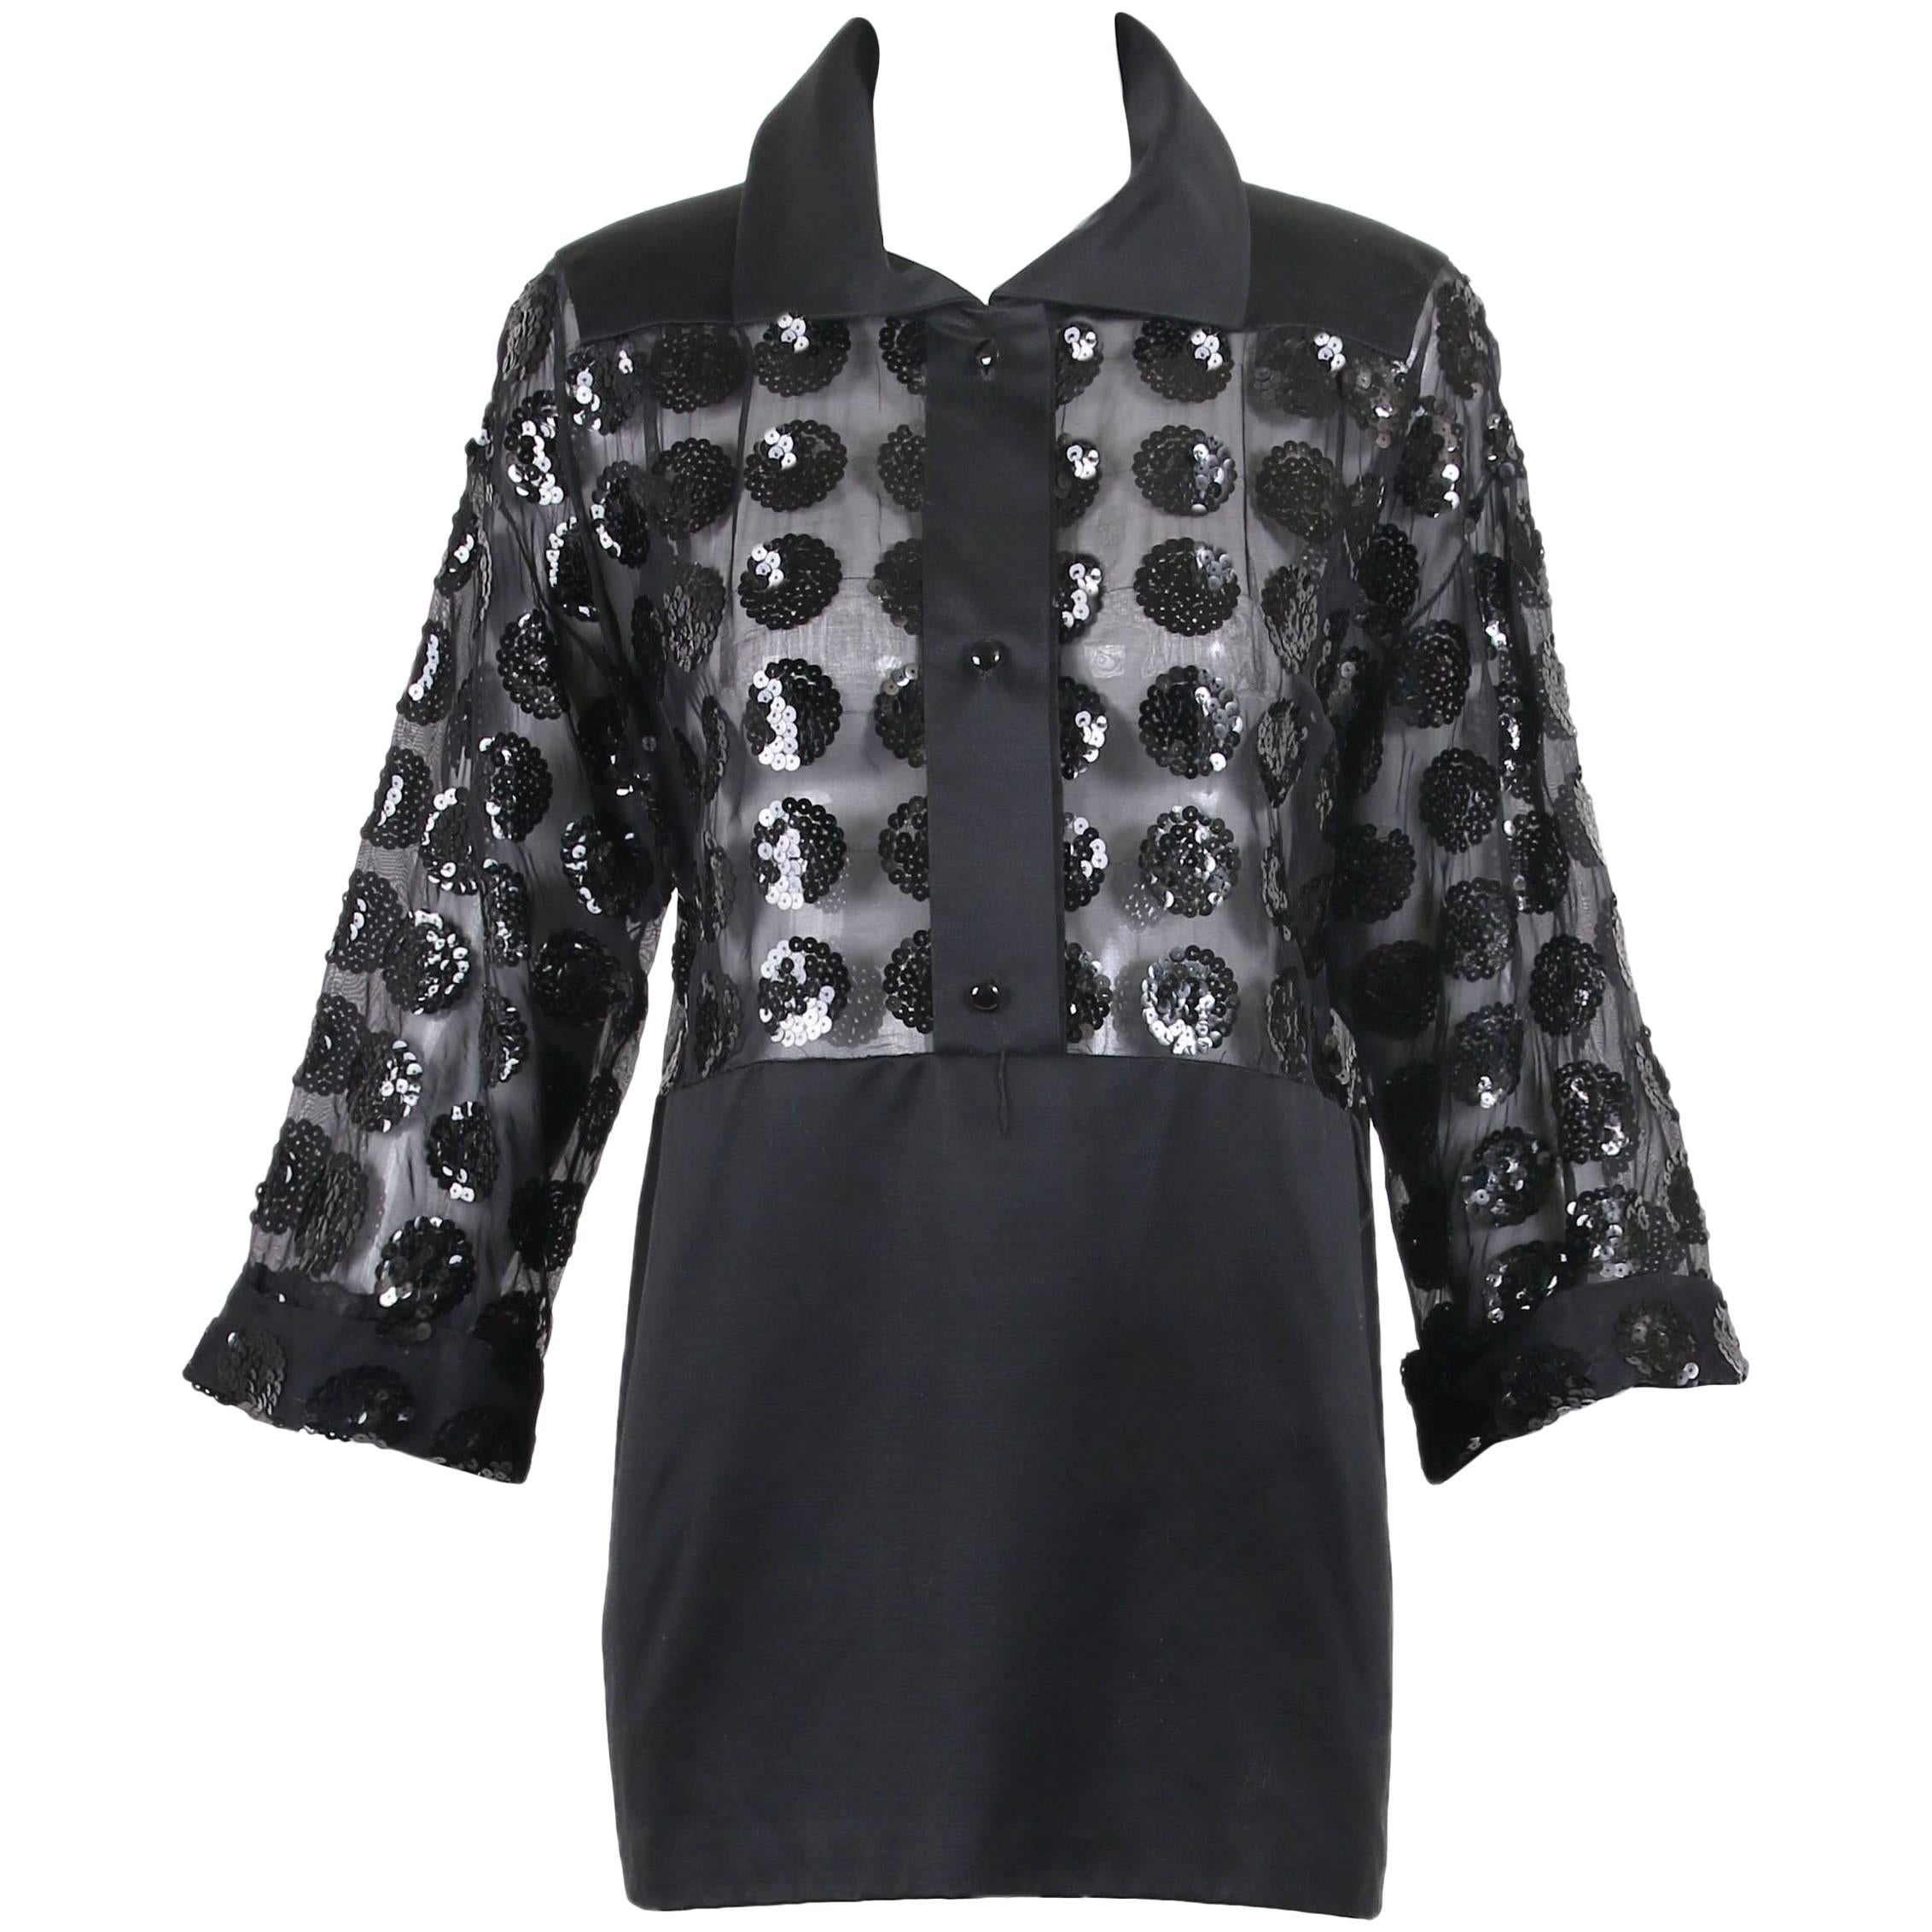 Courreges Black Mini Dress with Sheer Bodice and Pattern of Circular Sequins